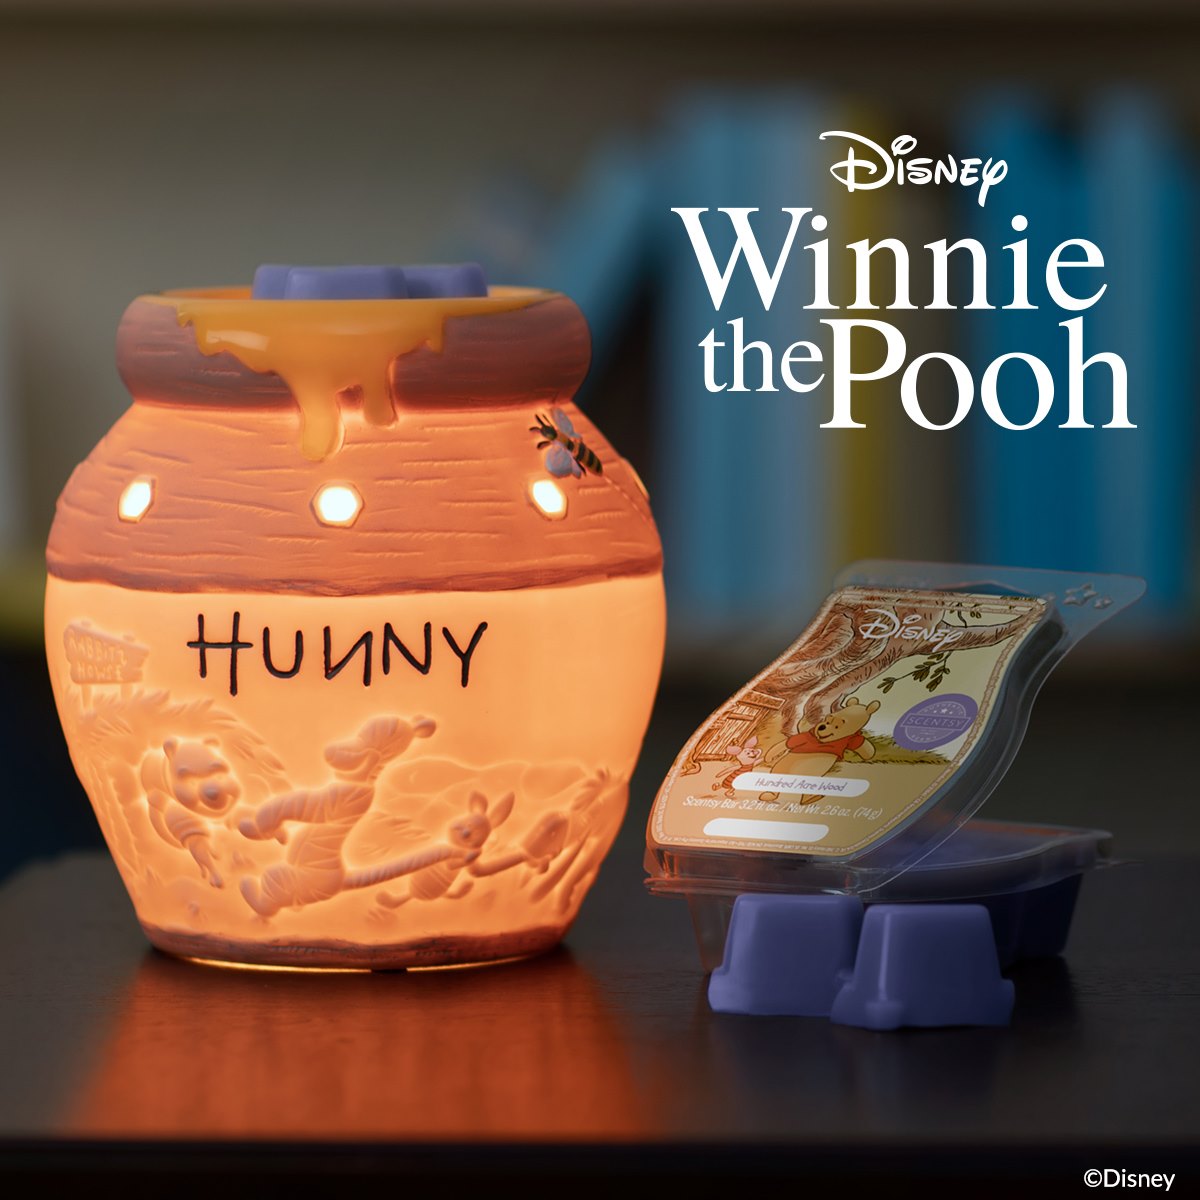 Scentsy Debuts Winnie the Pooh Hunny Warmer and Brings Back Some